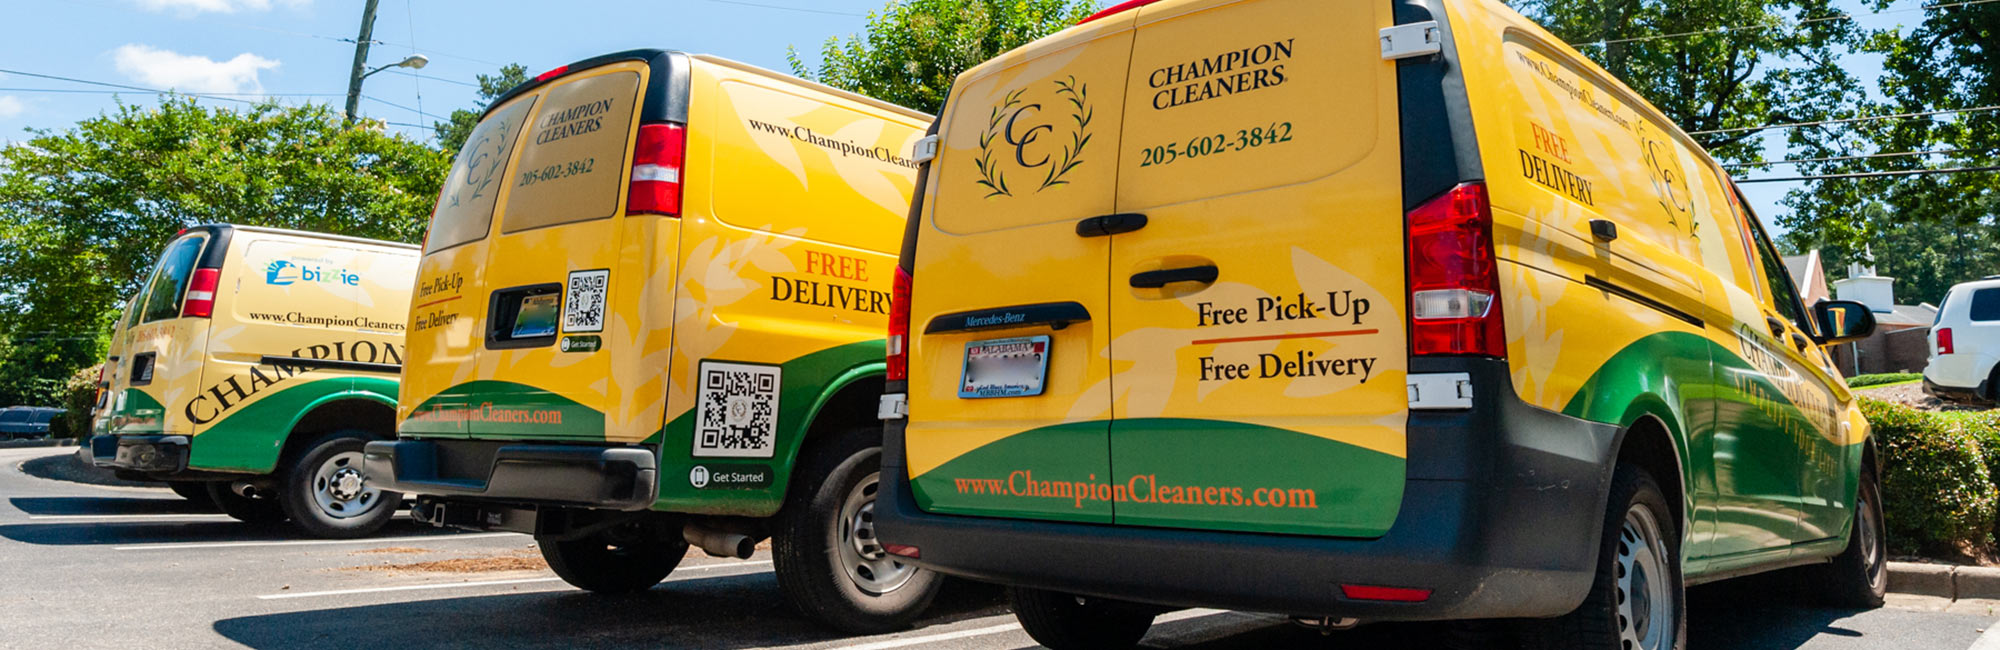 Champion Cleaners offers Pickup & Delivery Service